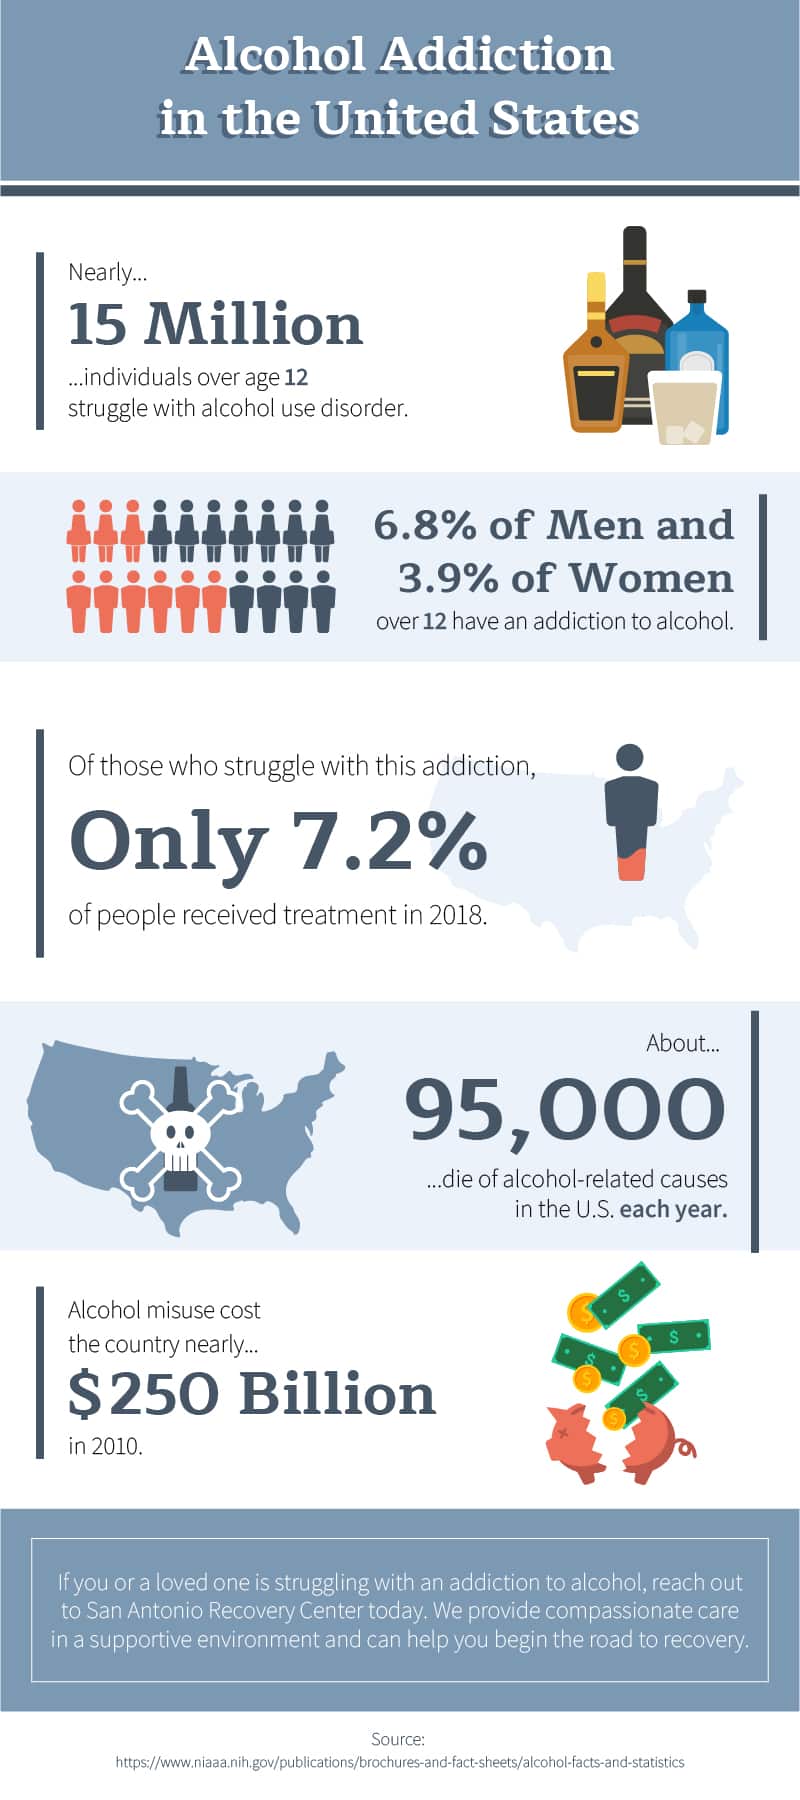 Graphic of statistics for alcohol addiction in the US